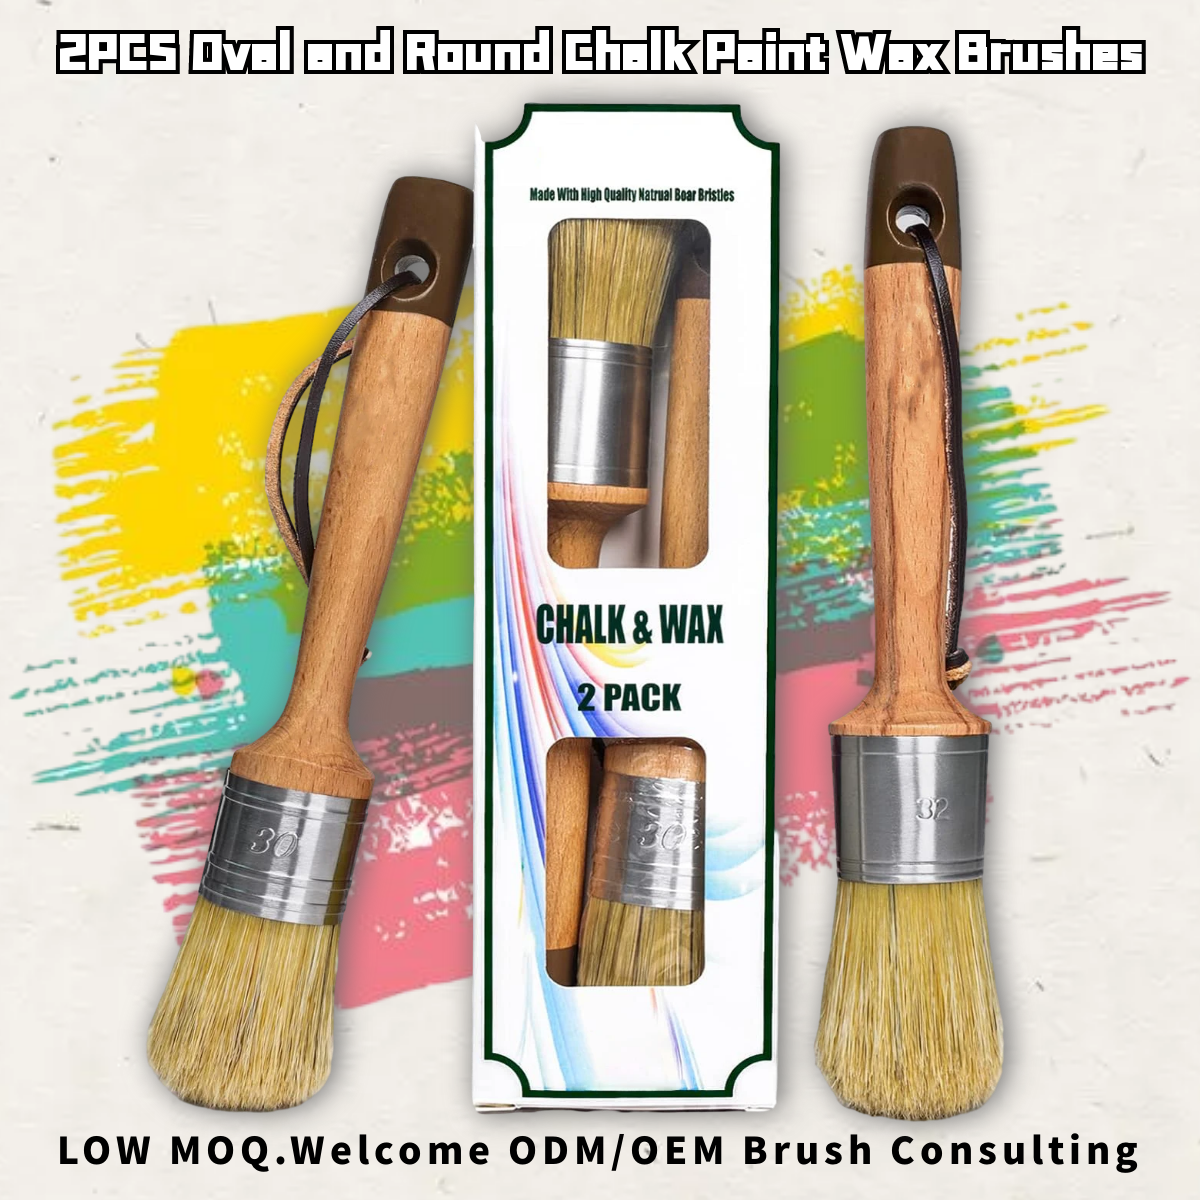 2PCS Oval and Round Chalk Paint Wax Brushes